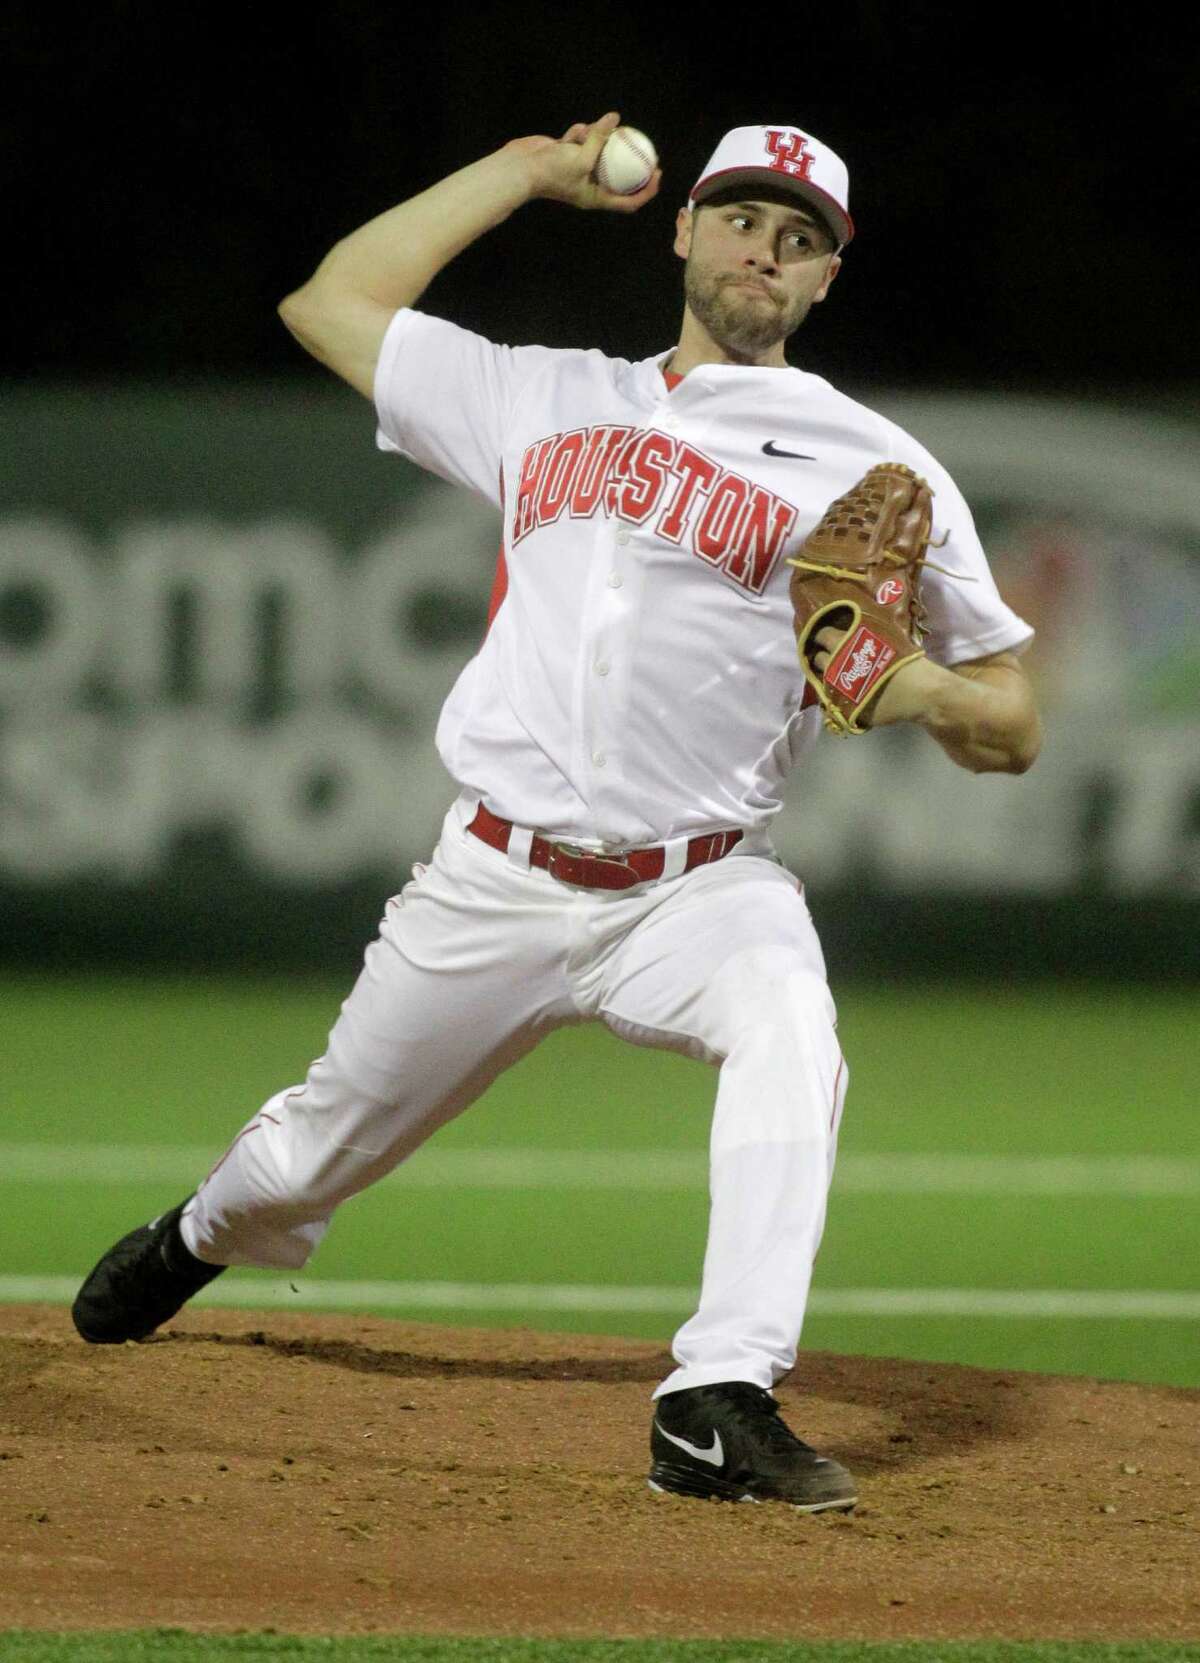 Houston pitcher Aaron Garza has been one of severla bright spots for the No. 23 Cougars.